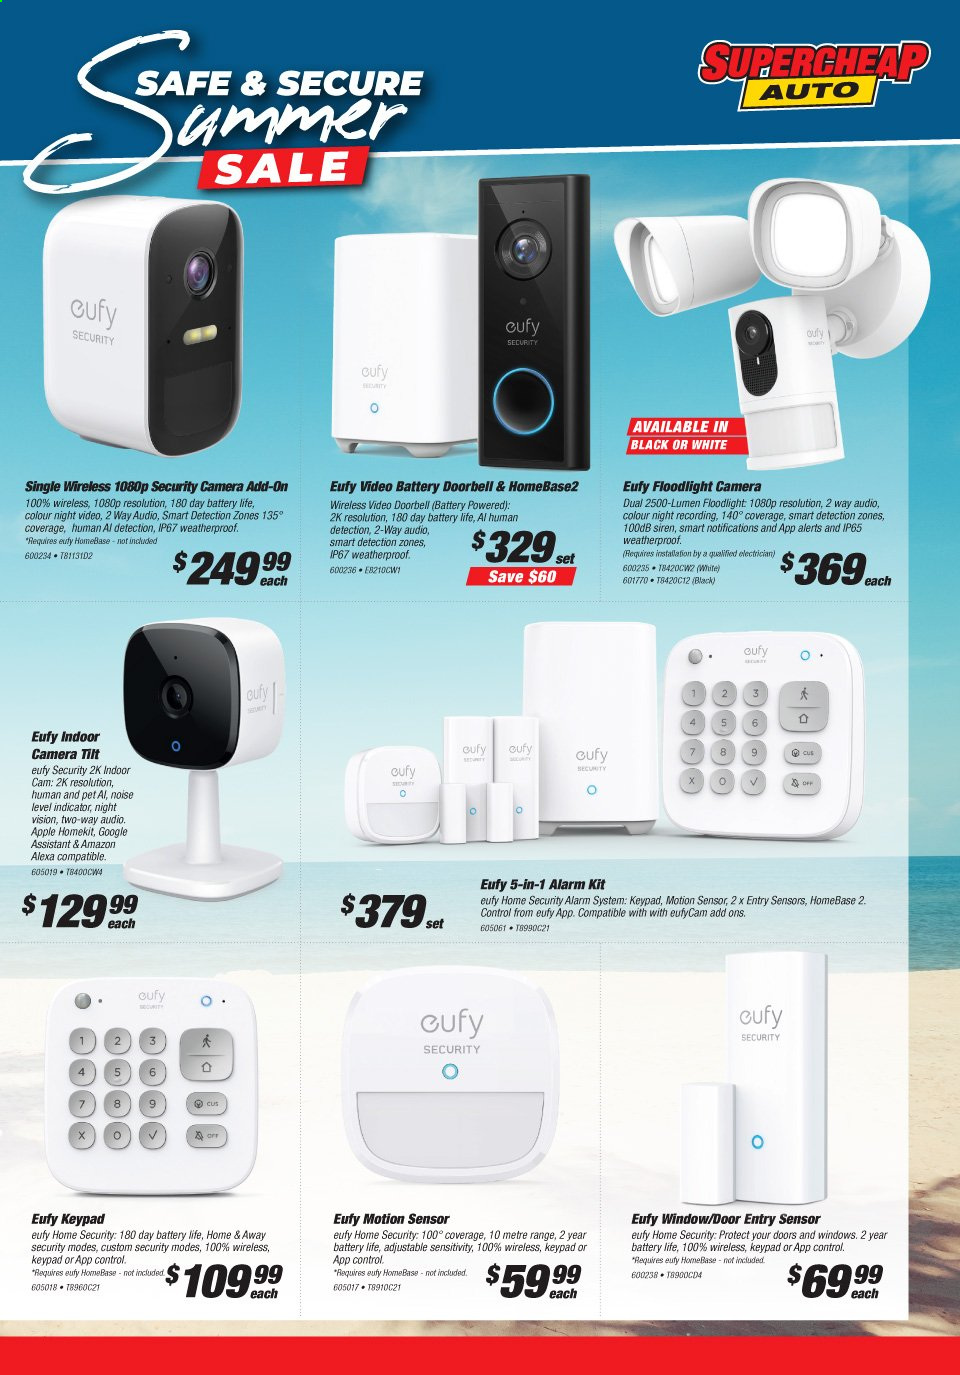 thumbnail - SuperCheap Auto mailer - 28.01.2021 - 10.02.2021 - Sales products - Apple, alarm system, security camera. Page 3.